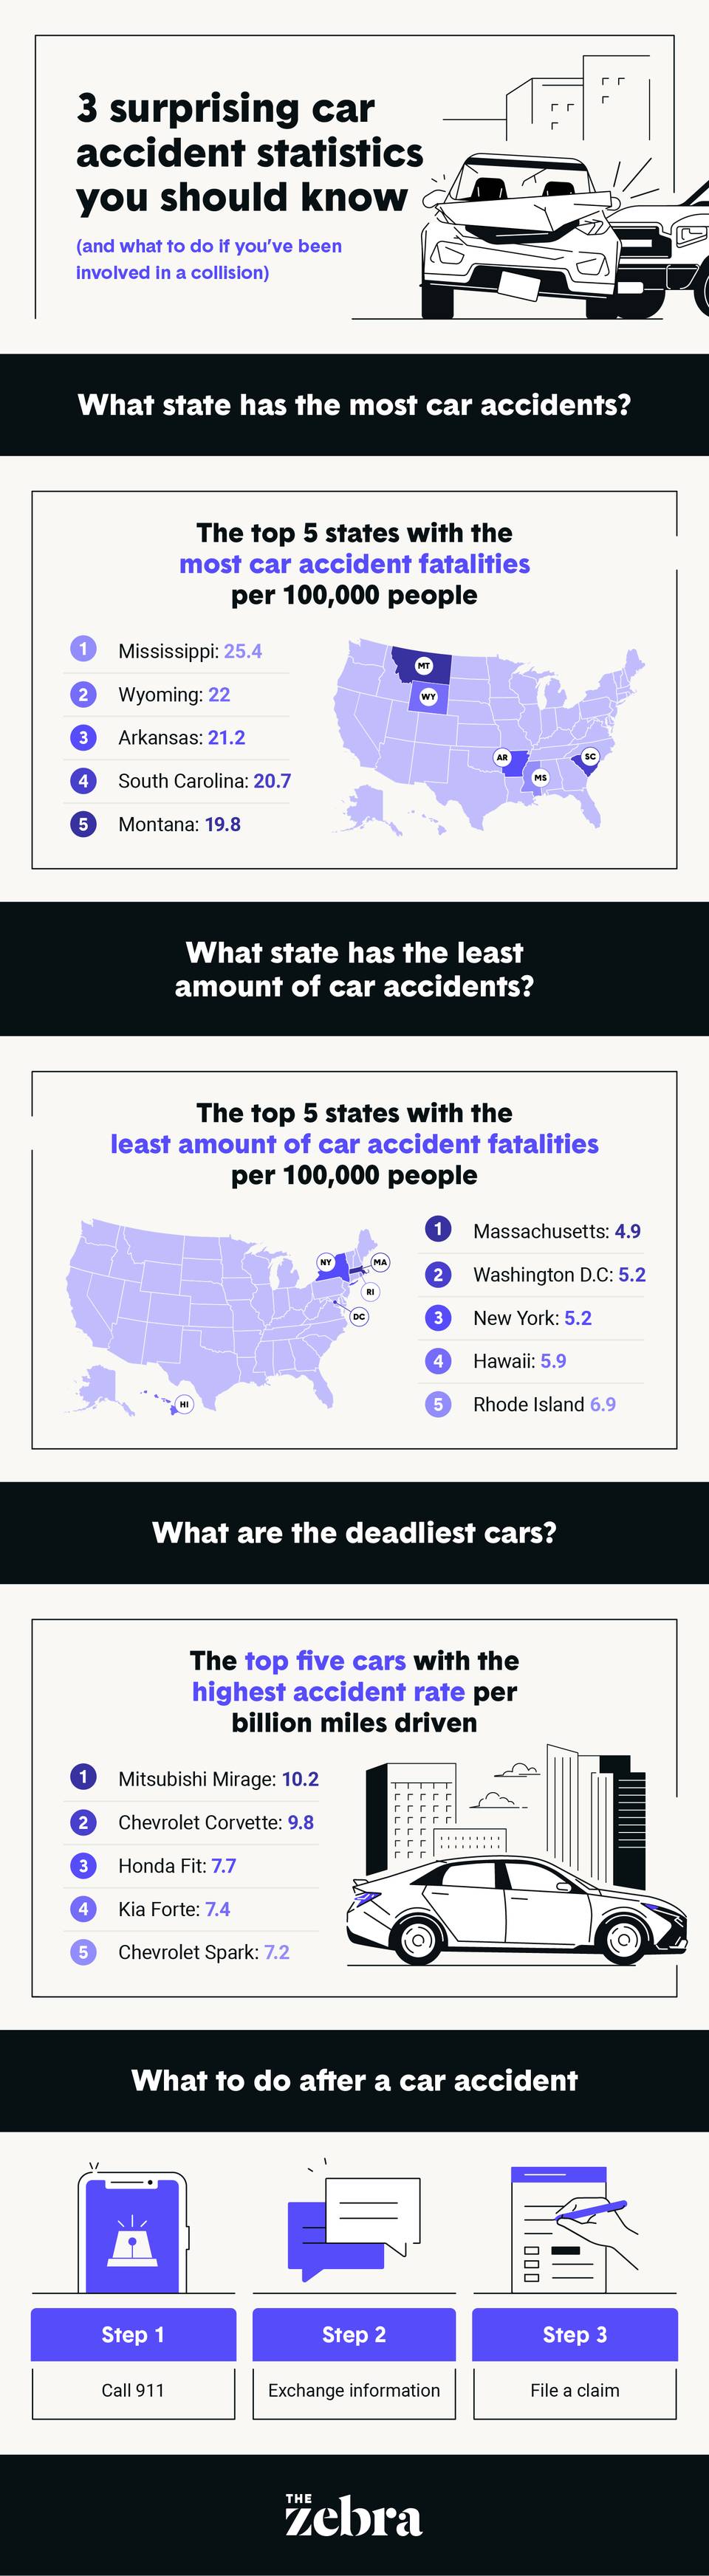 What State Has the Most Car Accidents?